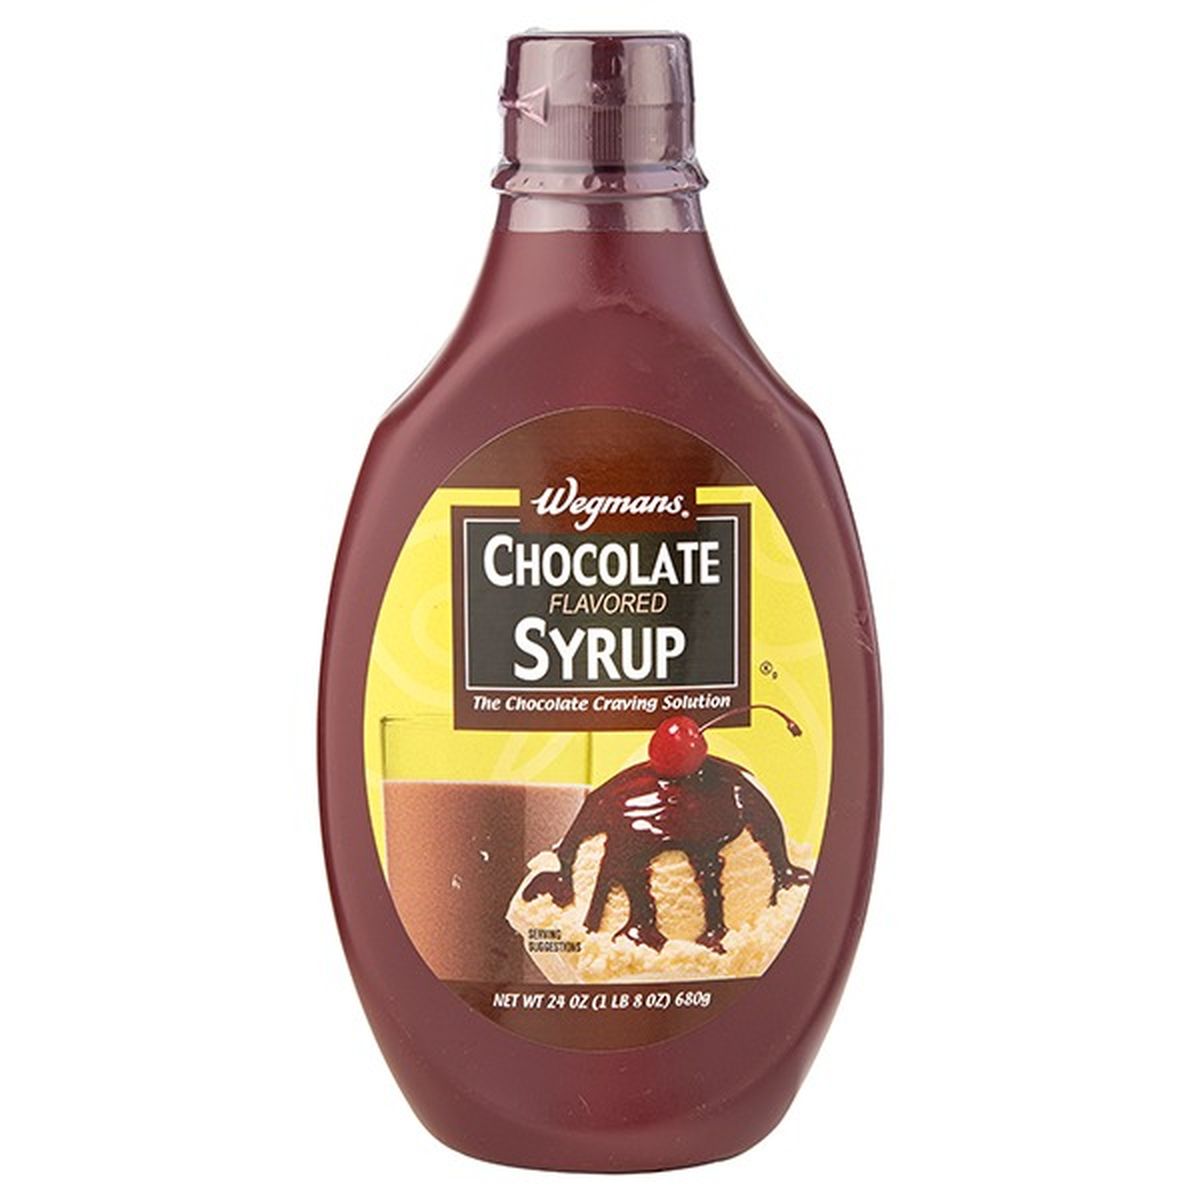 Calories in Wegmans Chocolate Flavored Syrup